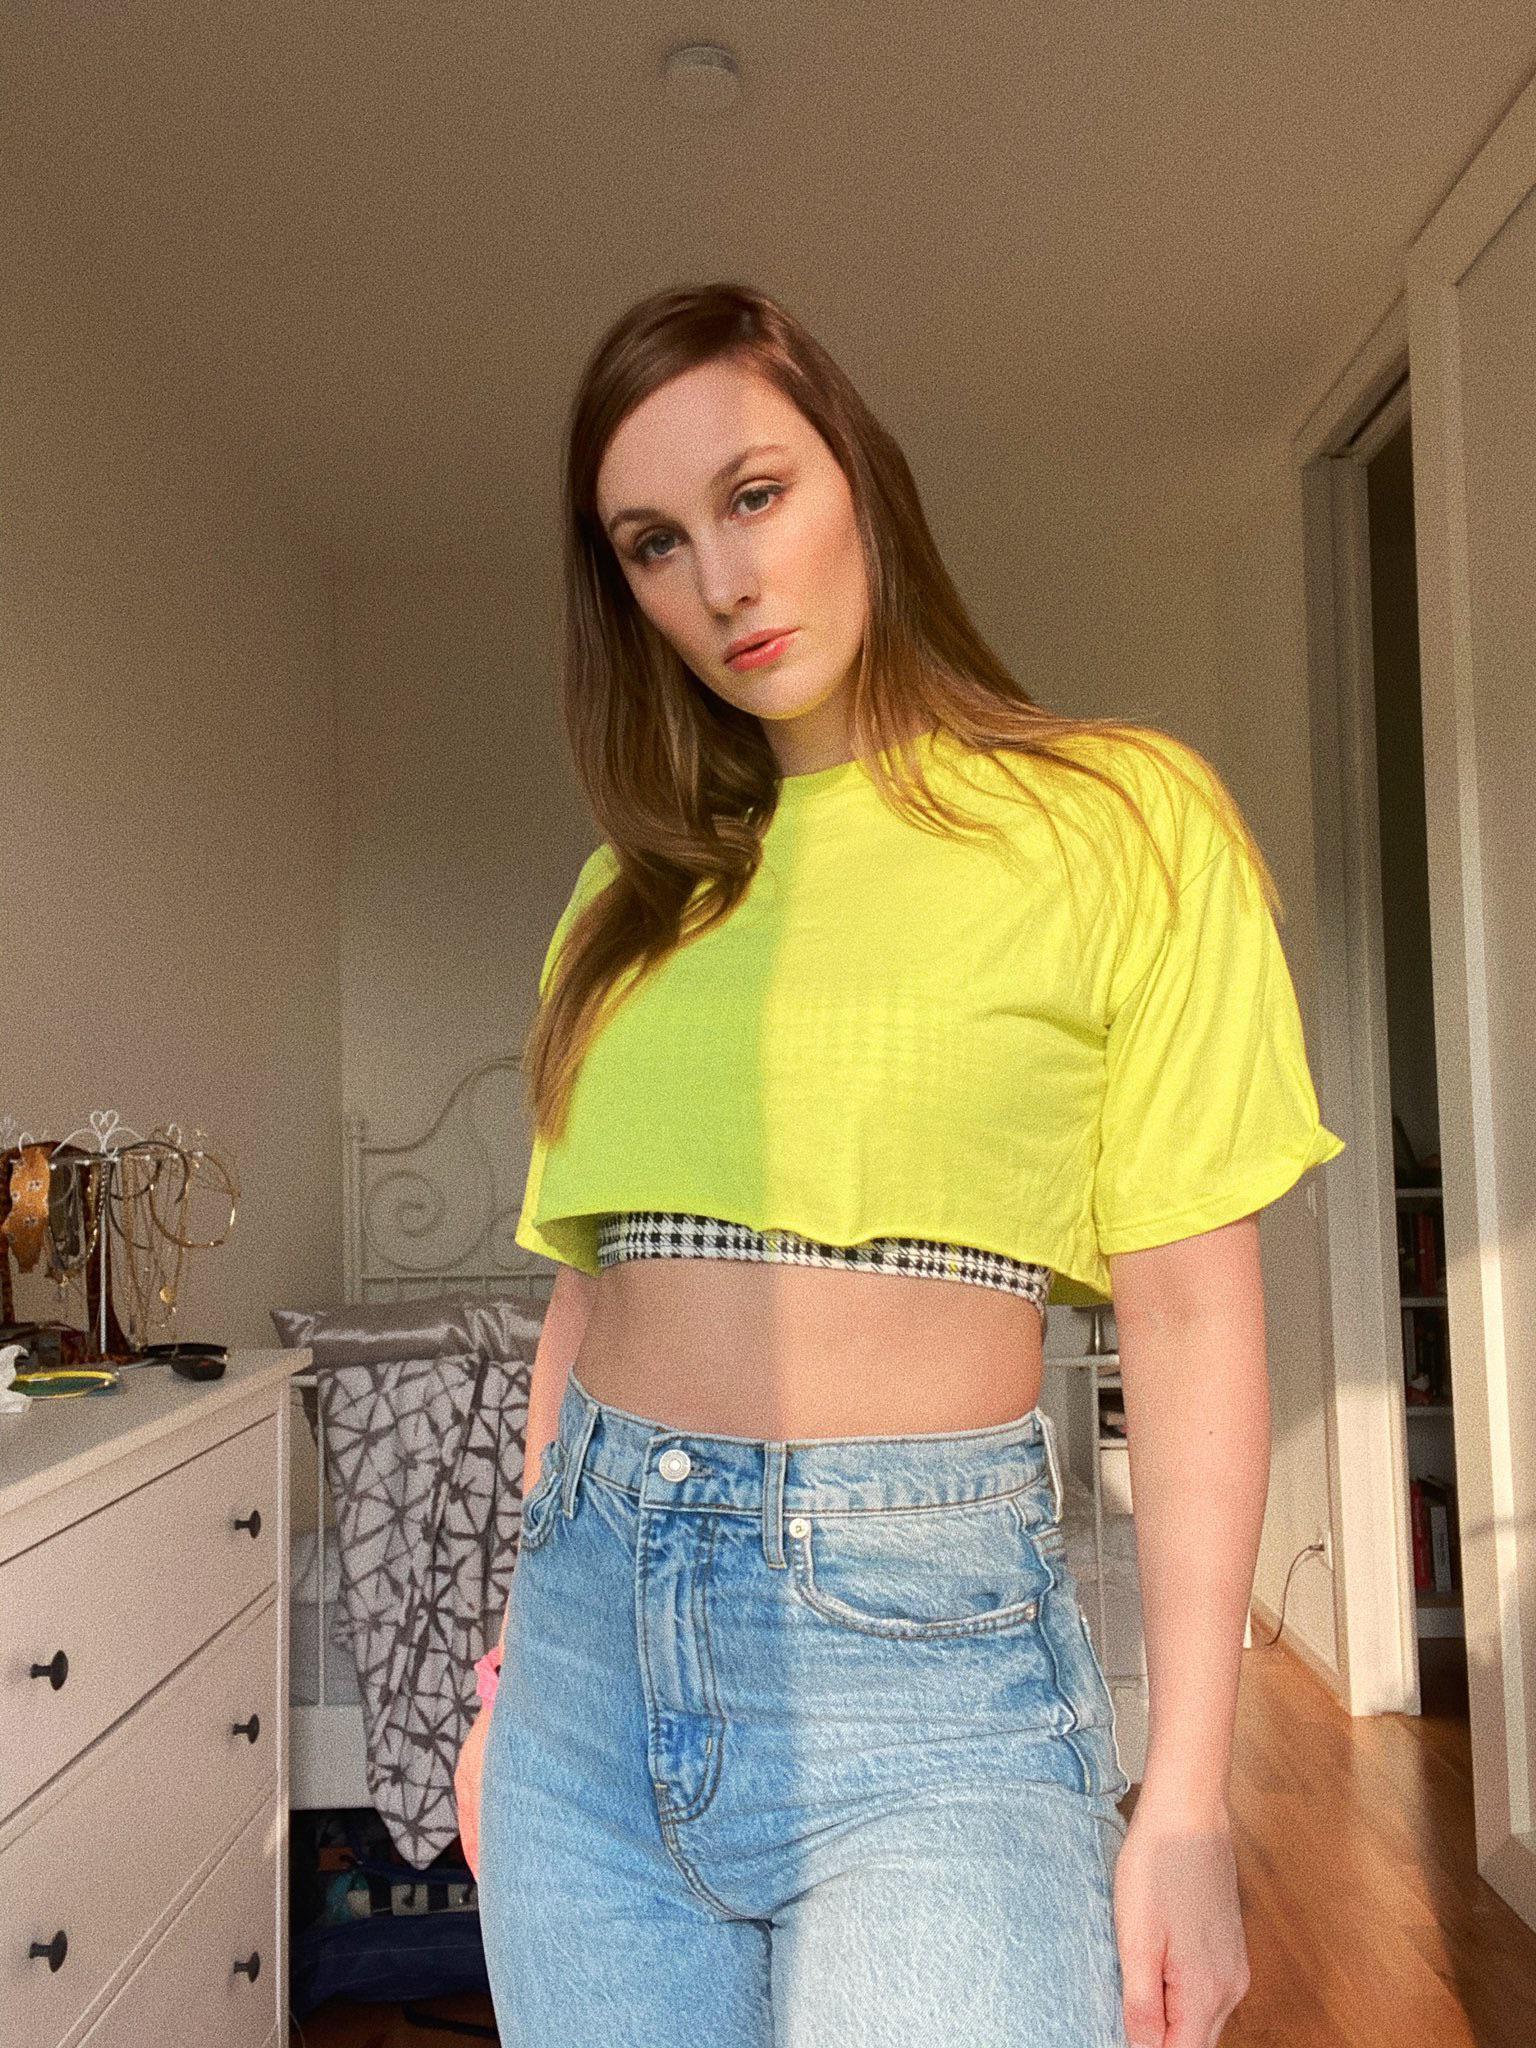 Who Knows Sjokz And Can Help Me Cum For He